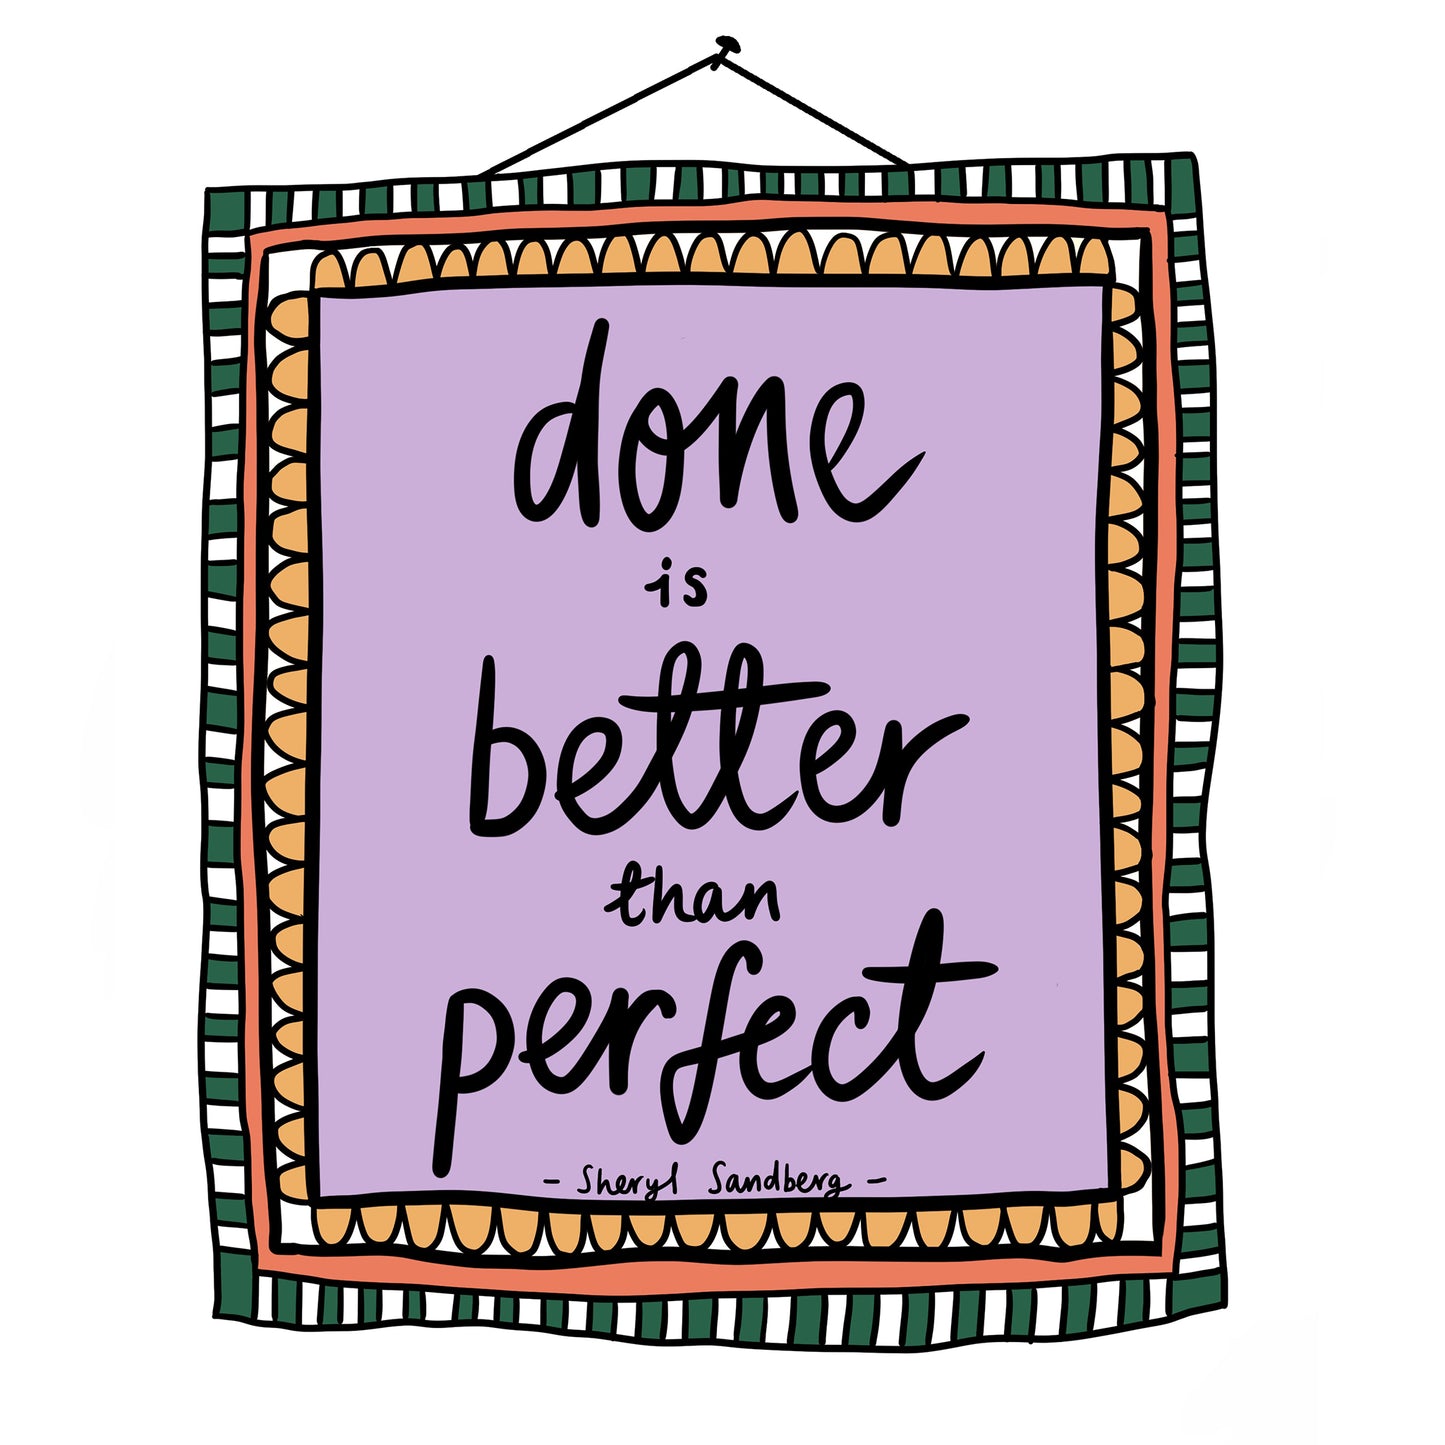 Done Is Better Than Perfect